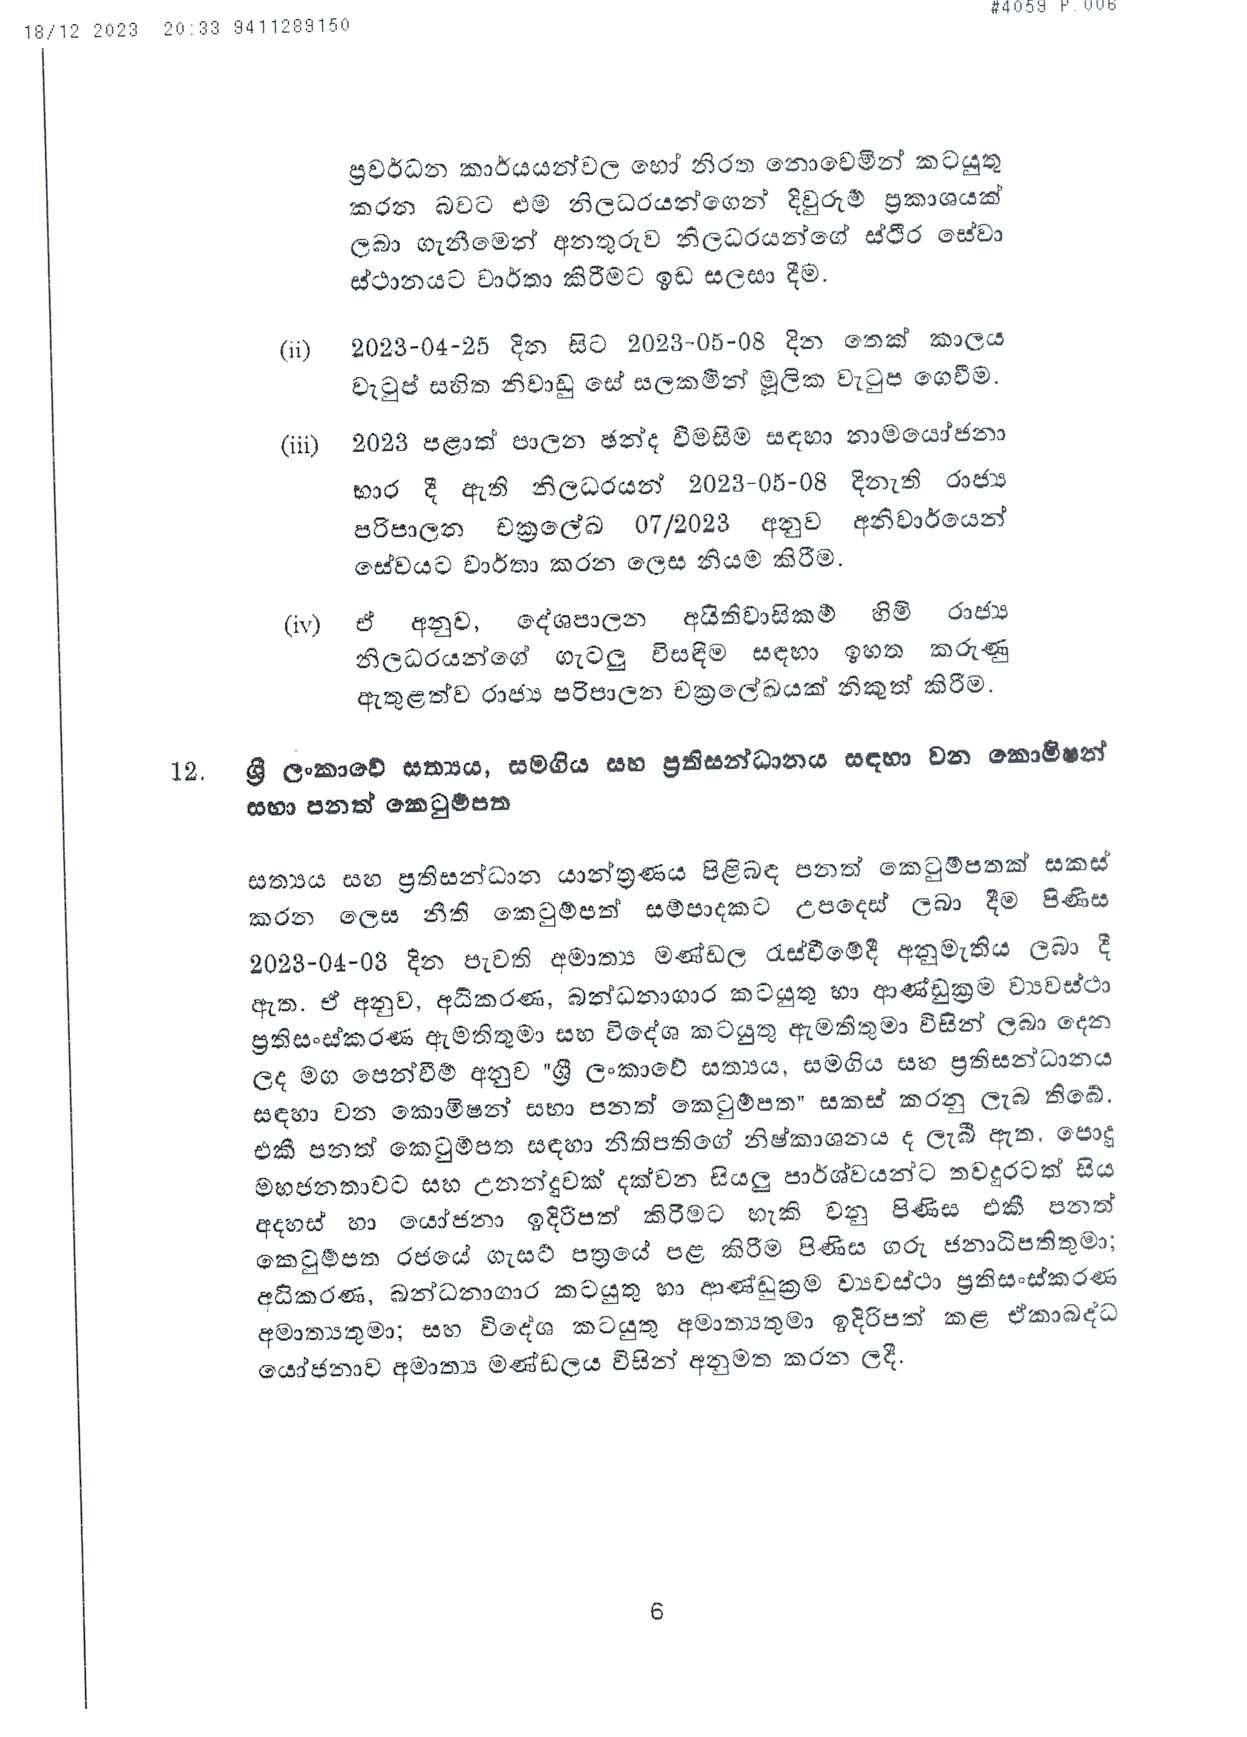 Cabinet Decision on 18.12.2023 page 006